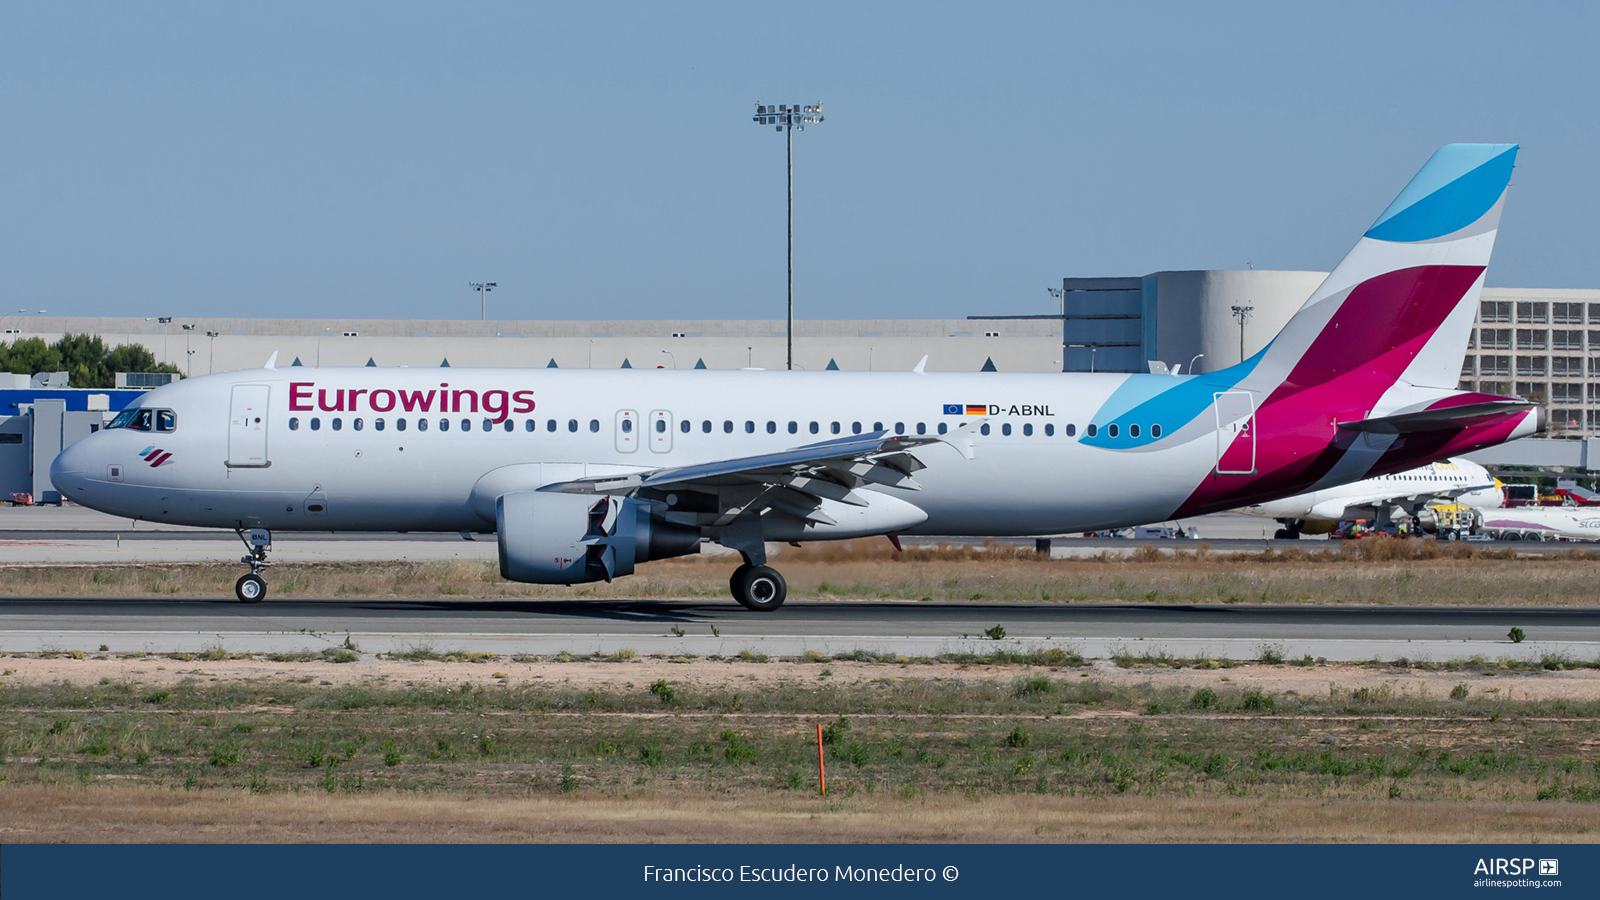 Eurowings  Airbus A320  D-ABNL